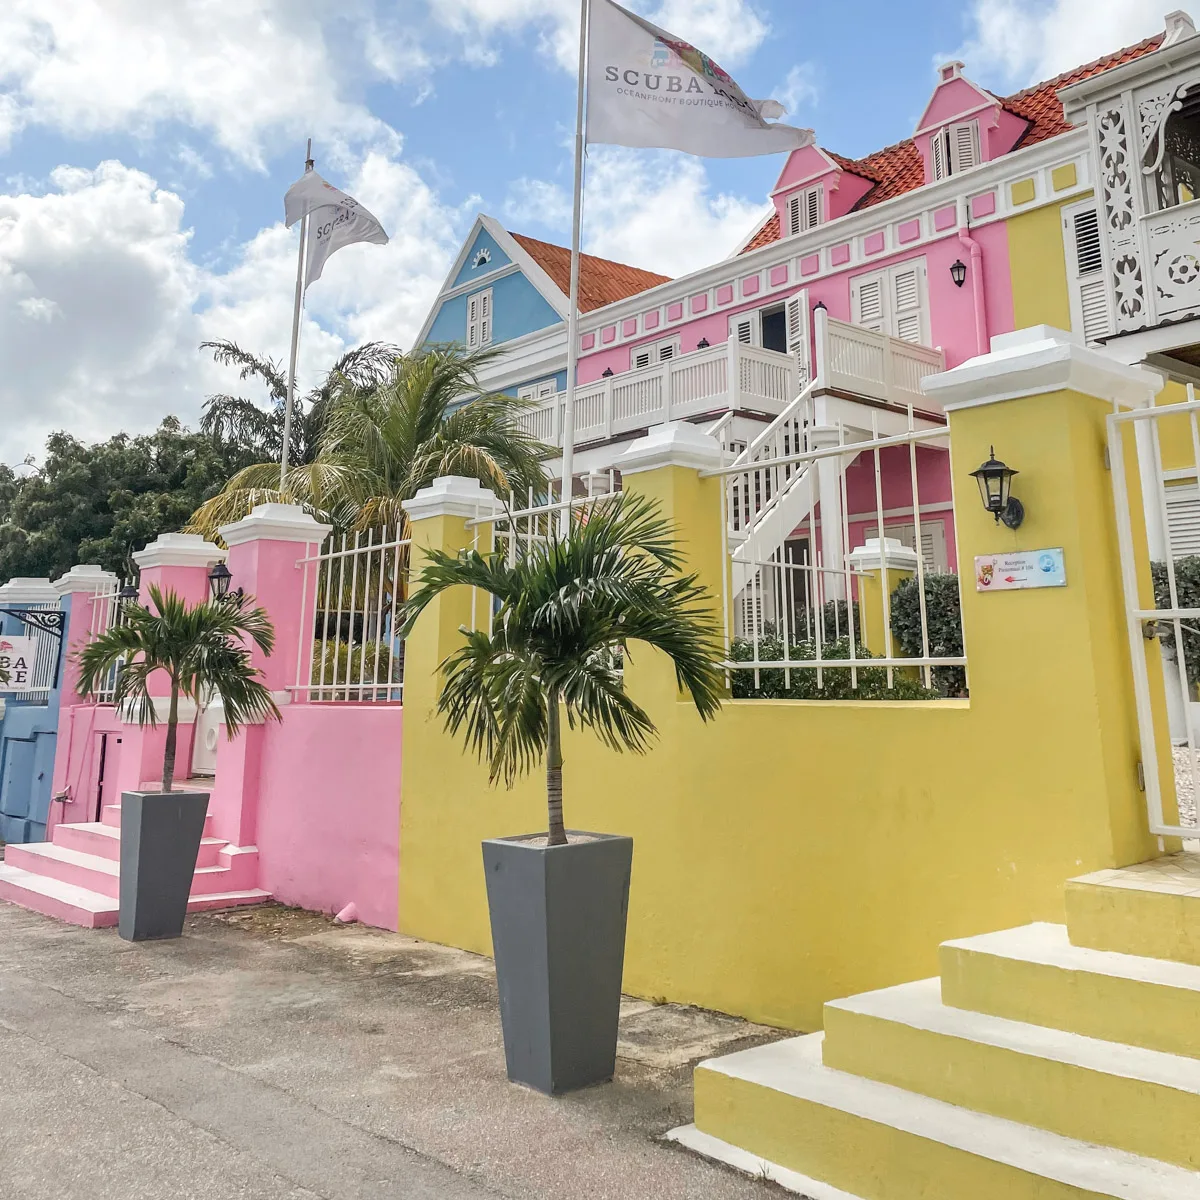 colorful houses of the scuba lodge one of the best hotels for scuba diving in curacao